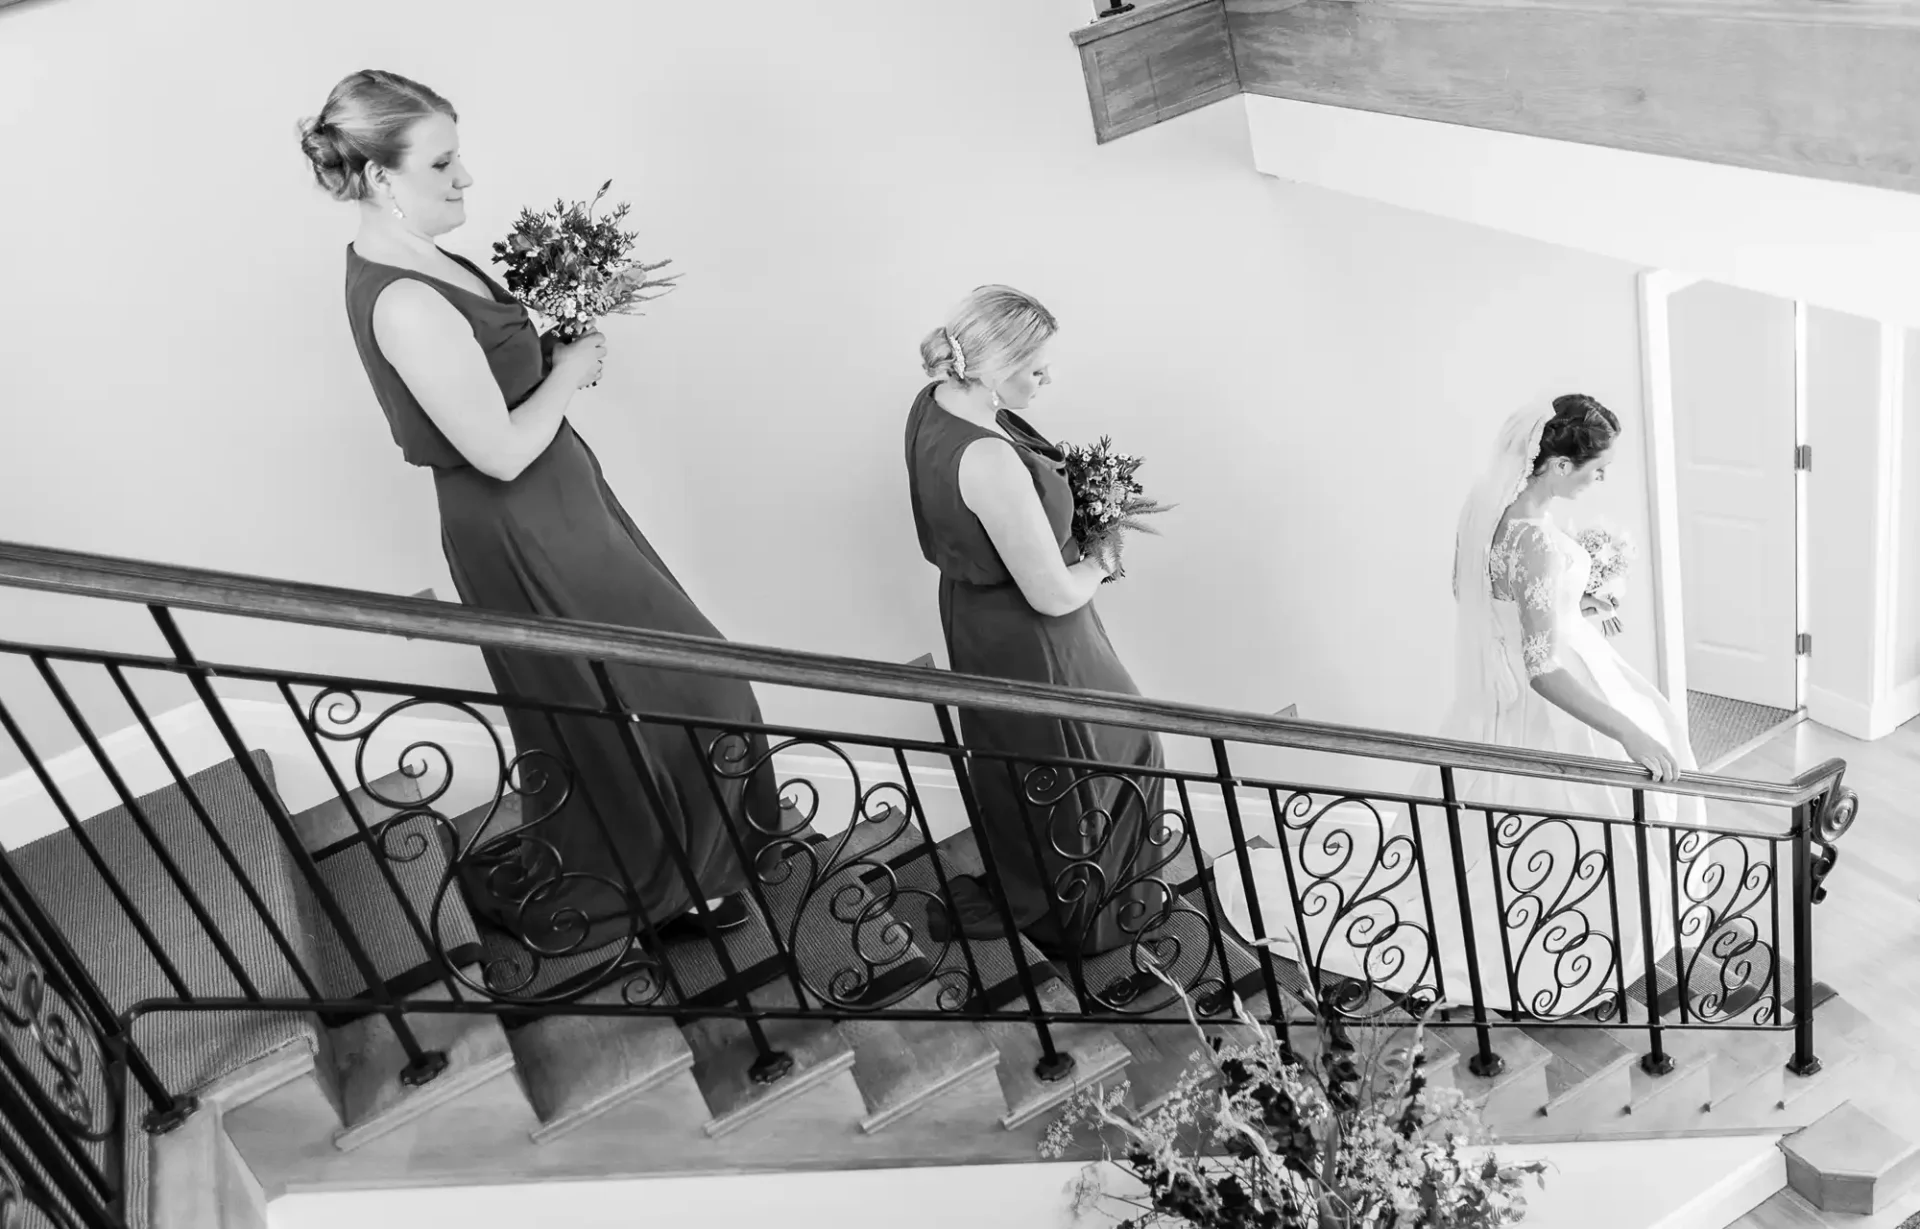 Three bridesmaids in dark dresses carry bouquets, descending a staircase with ornate railings, with a bride in white visible in the background.